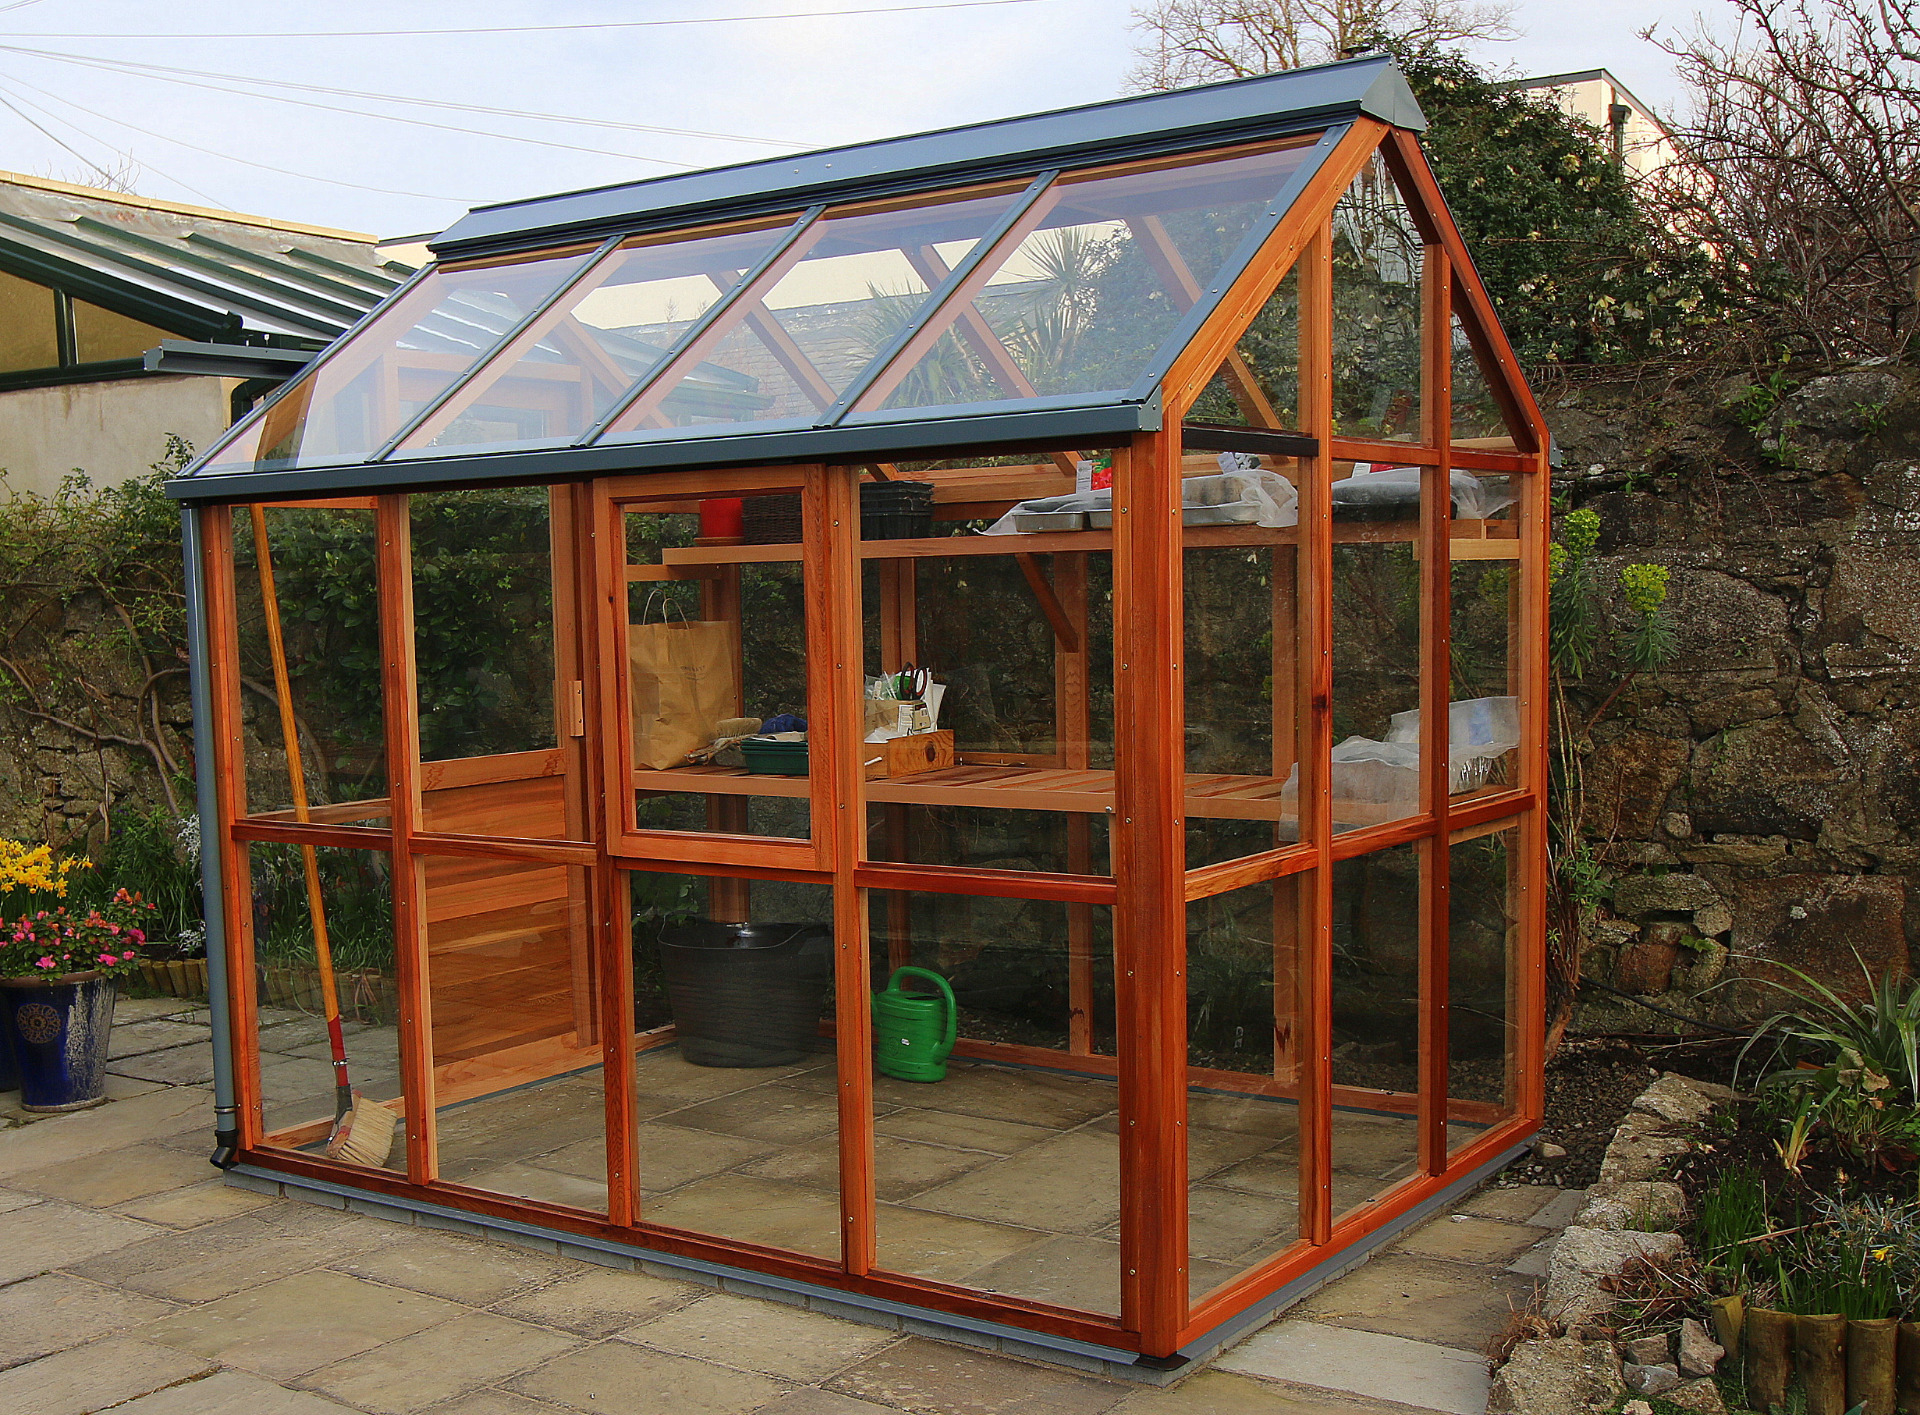 Gabriel Ash Classic Six Greenhouse in Monkstown, Co Dublin | the only timber greenhouses endorsed by the RHS | Owen Chubb  087-2306128